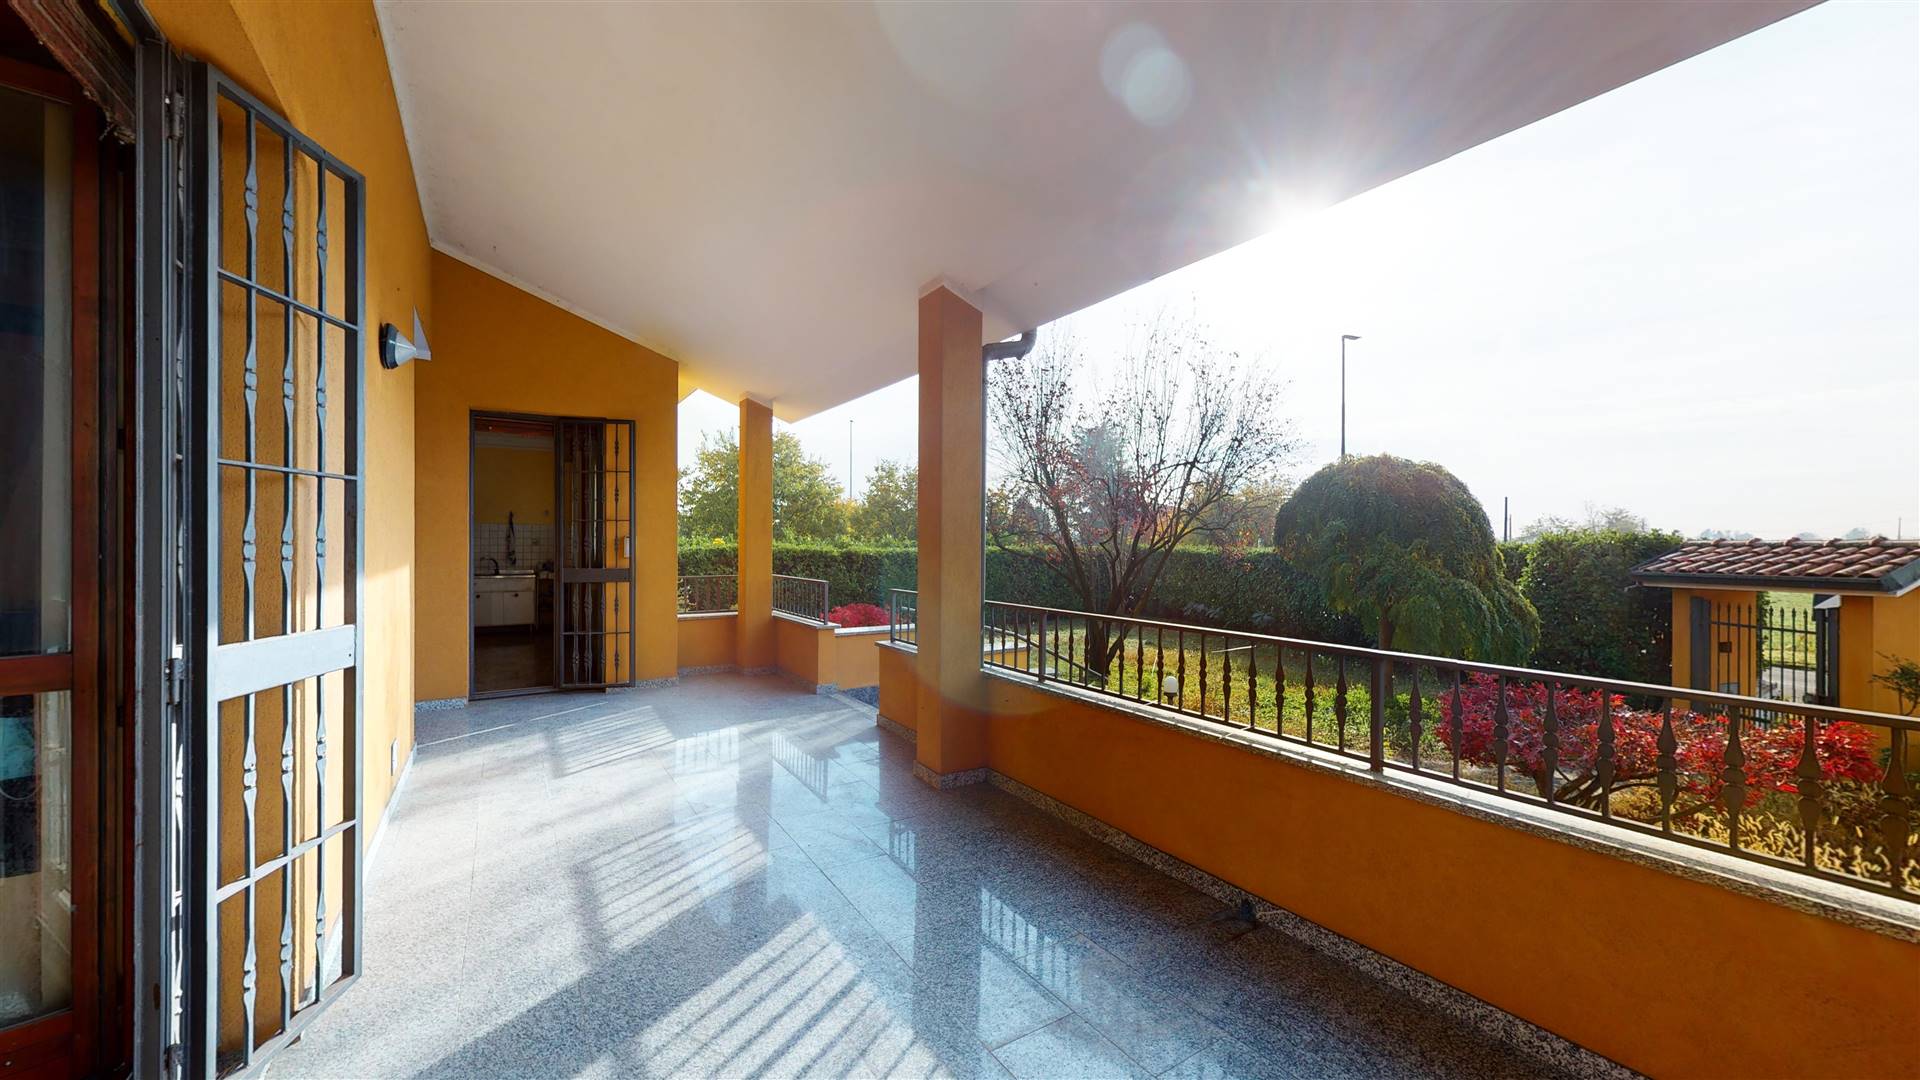 CASCINE SAN PIETRO, CASSANO D'ADDA, Villa for sale, Habitable, Heating Individual heating system, Energetic class: F, Epi: 251,51 kwh/m2 year, placed 